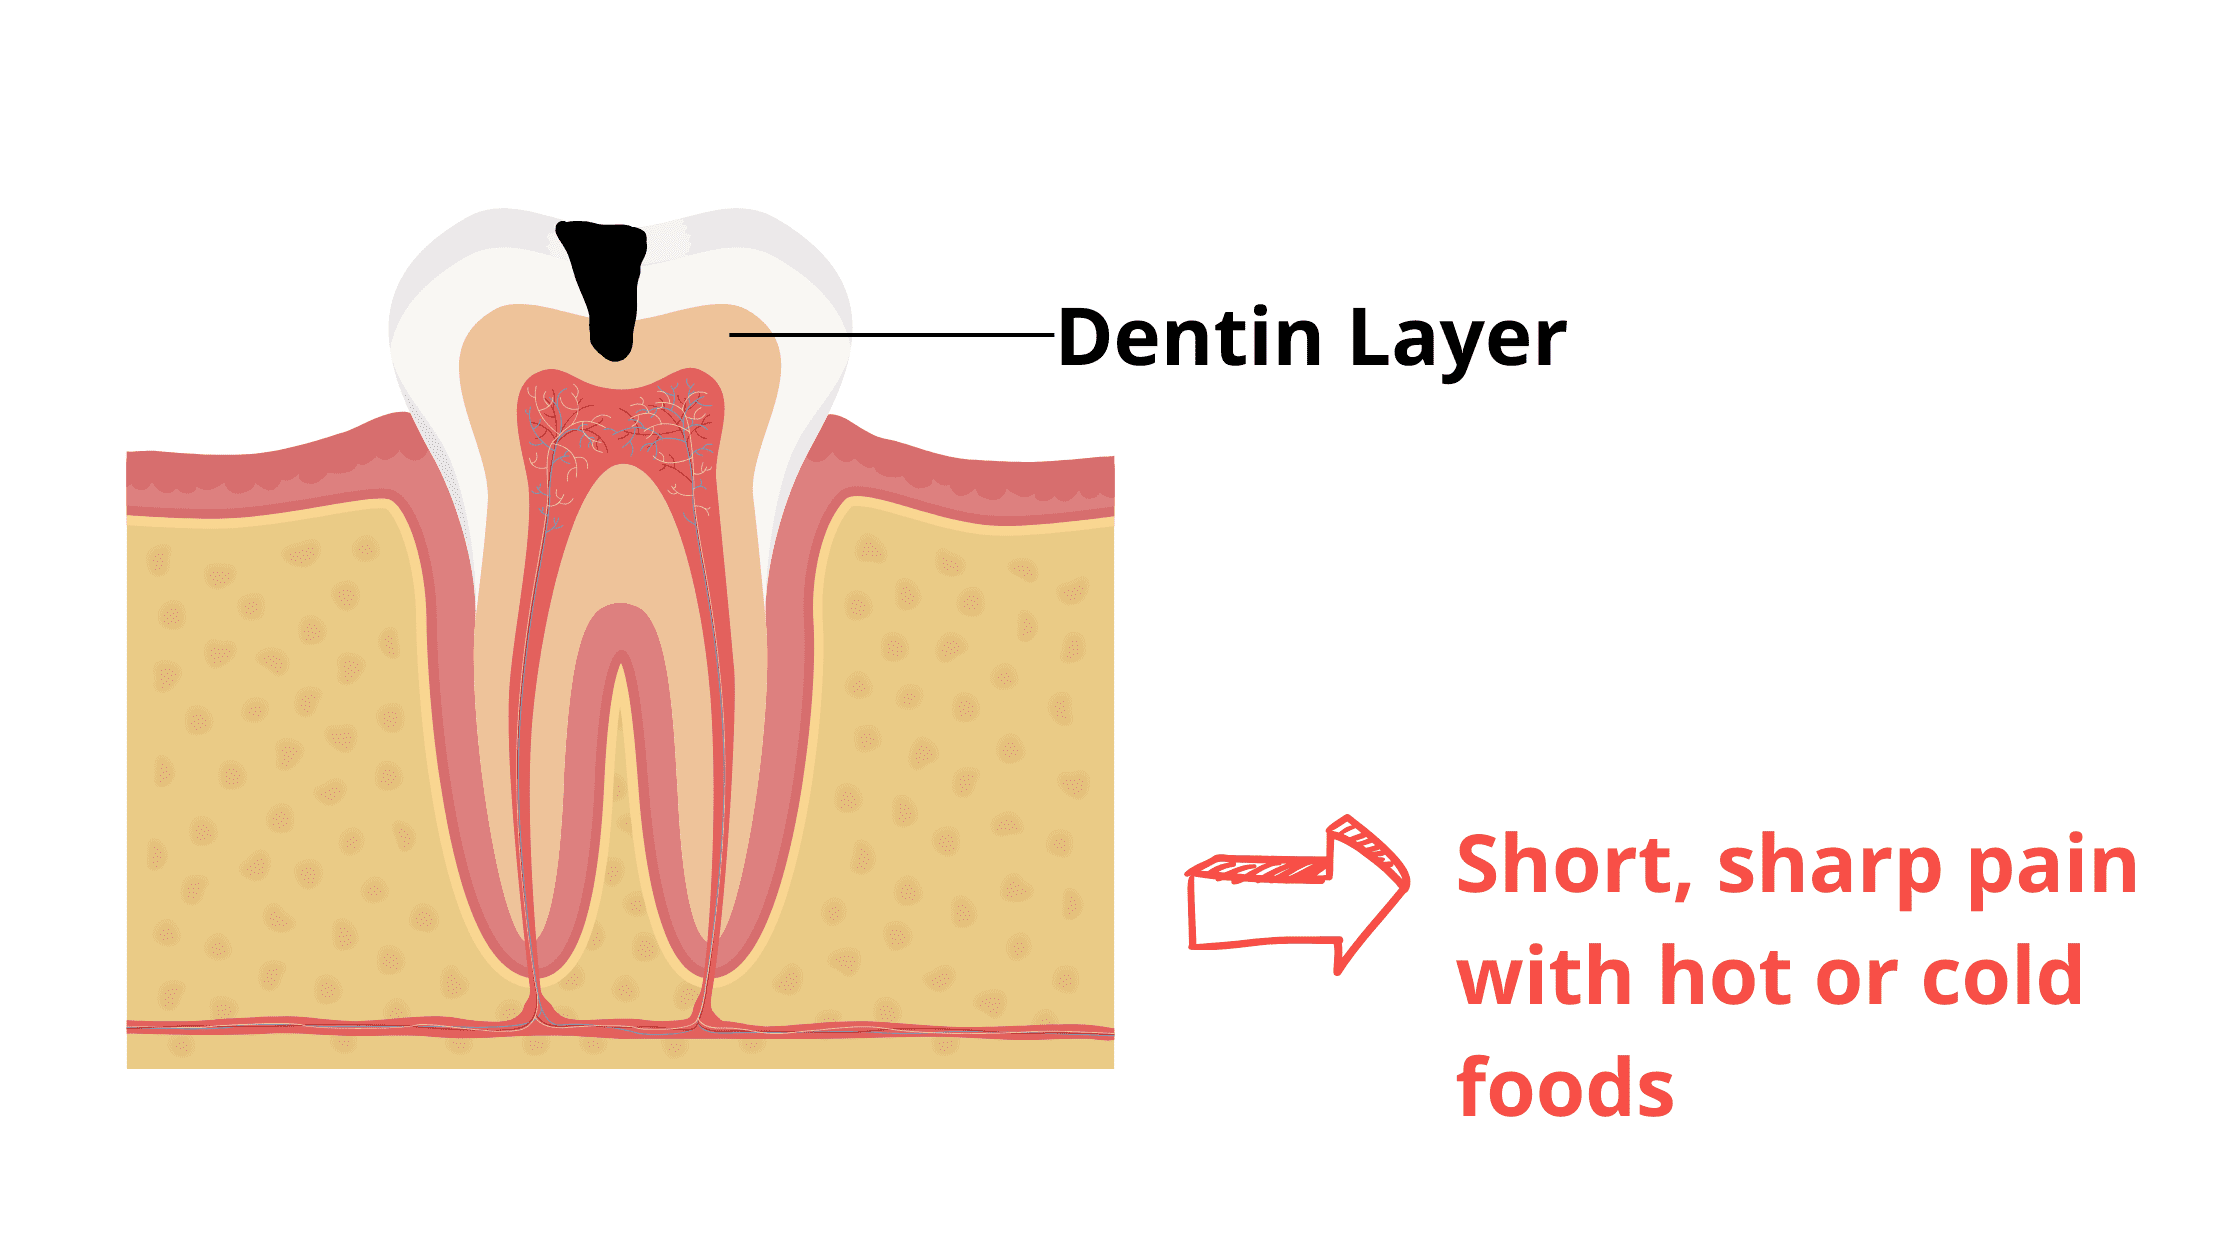 The tooth becomes sensitive when the dentine is affected